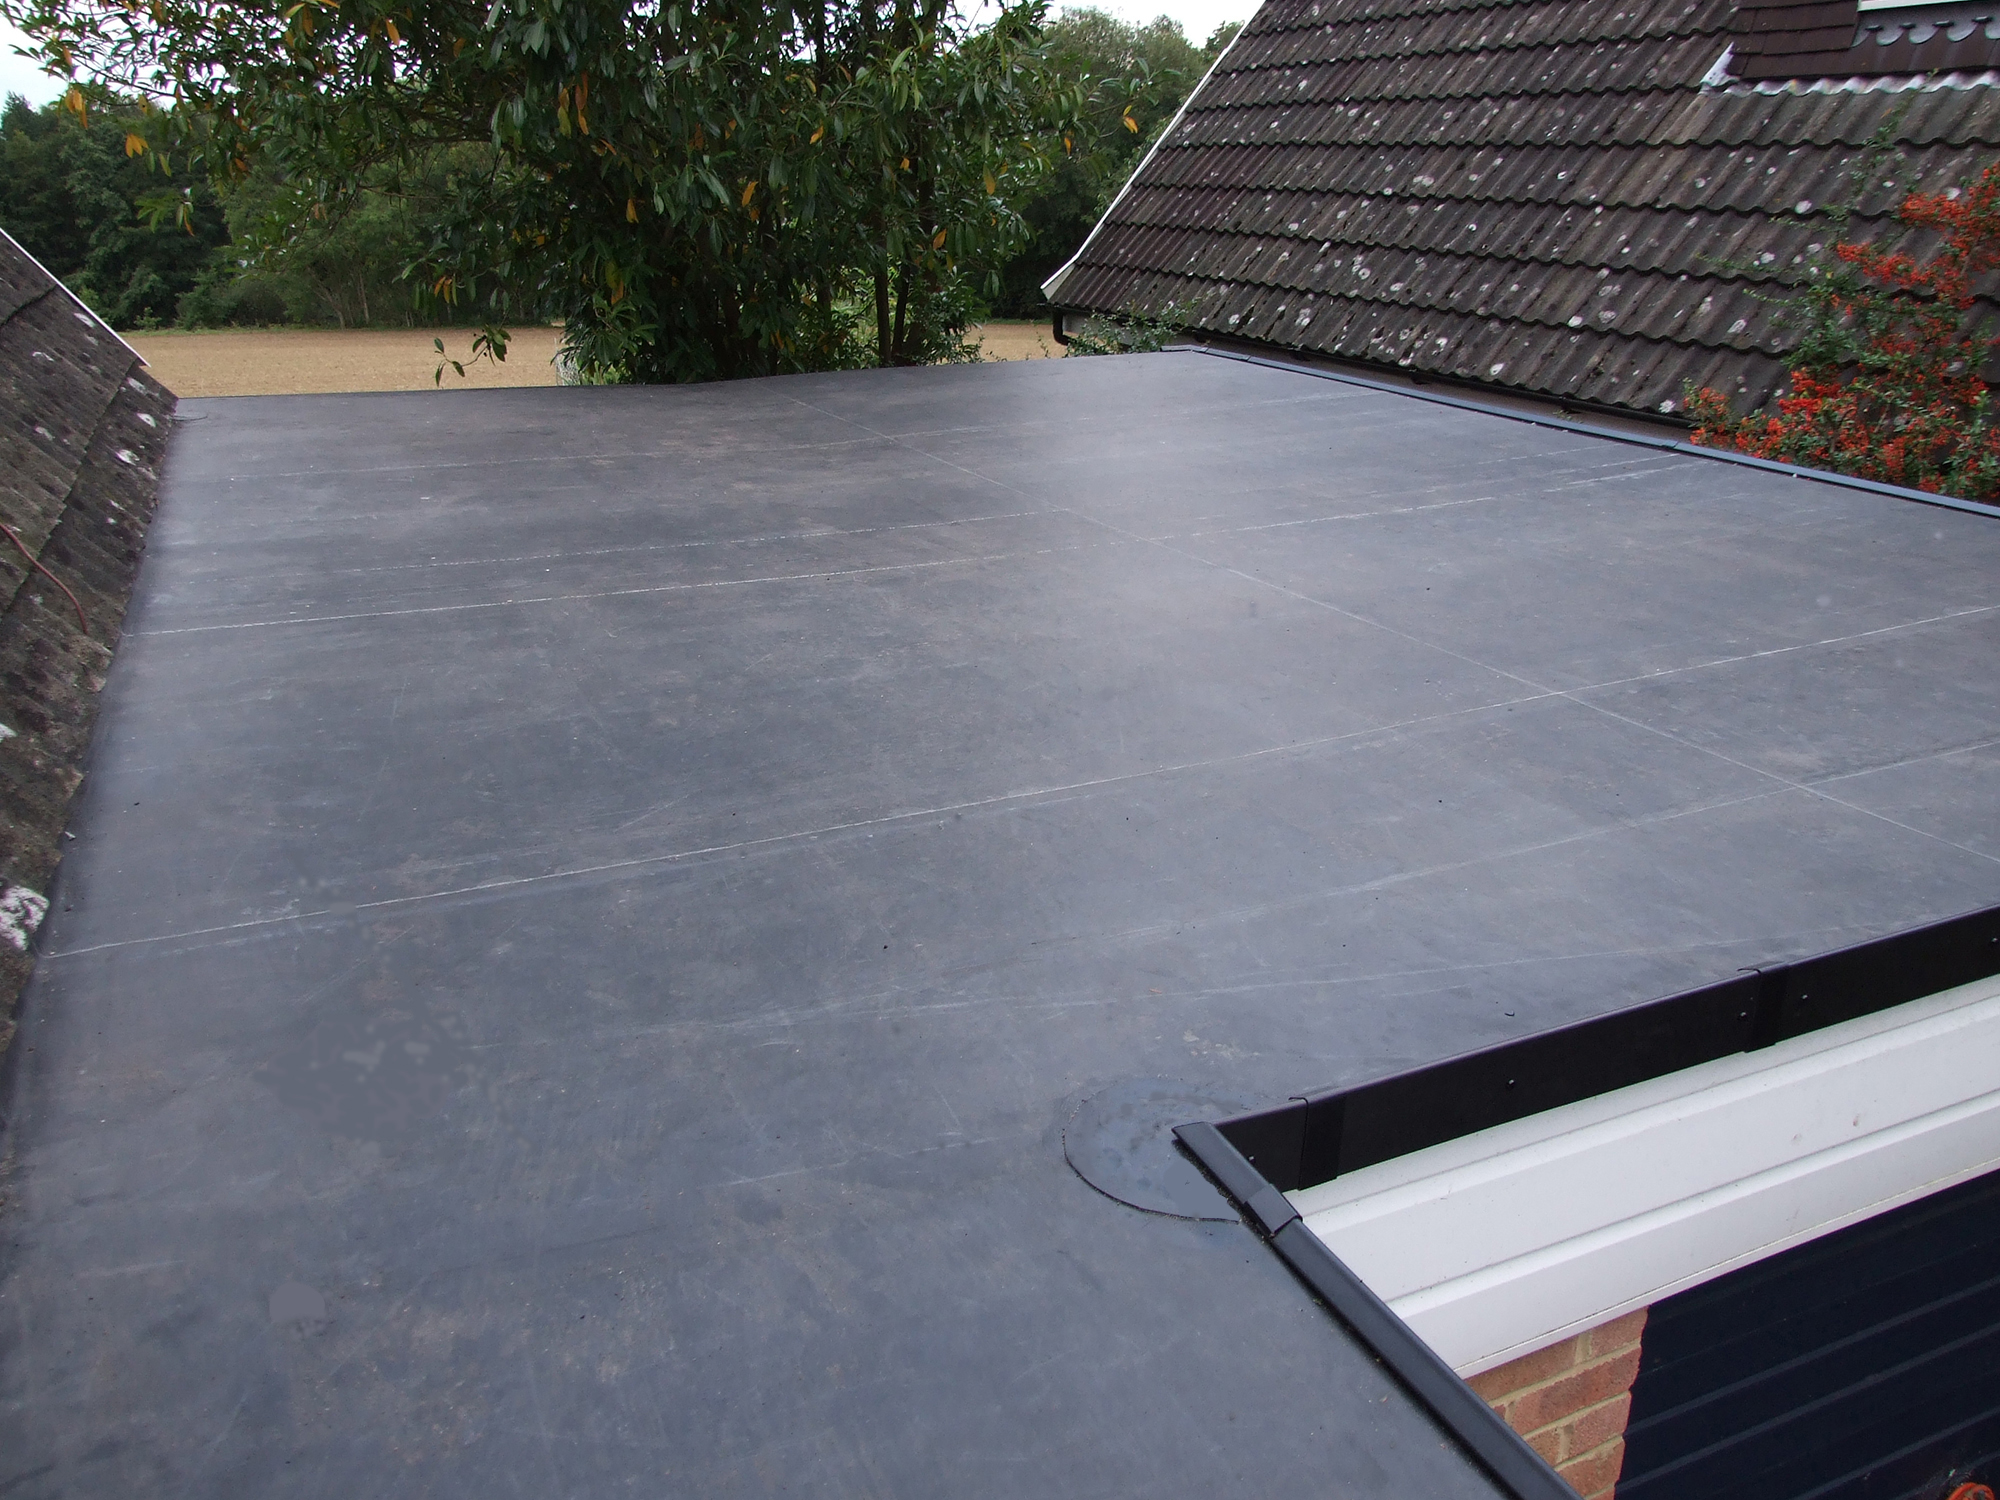 Why should you consider EPDM rubber for your roof?